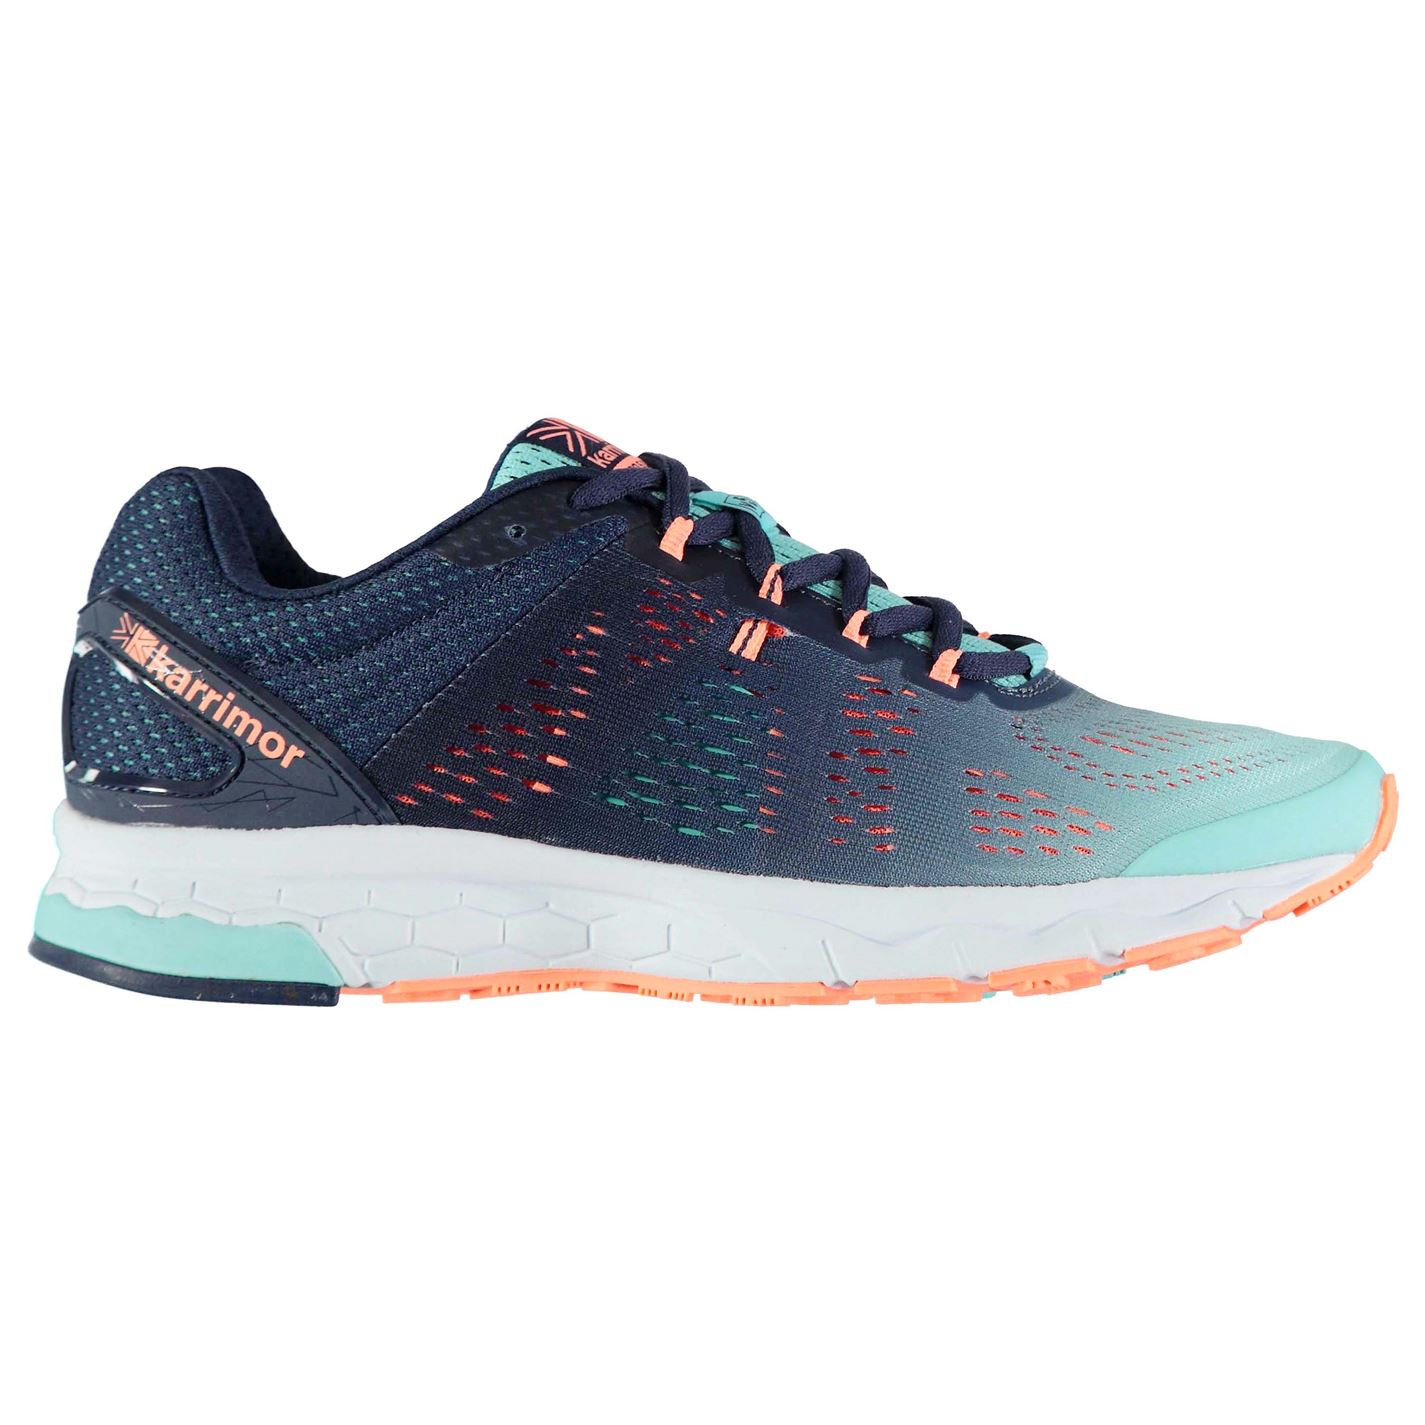 Karrimor Tempo 5 Support Ladies Road Running Shoes